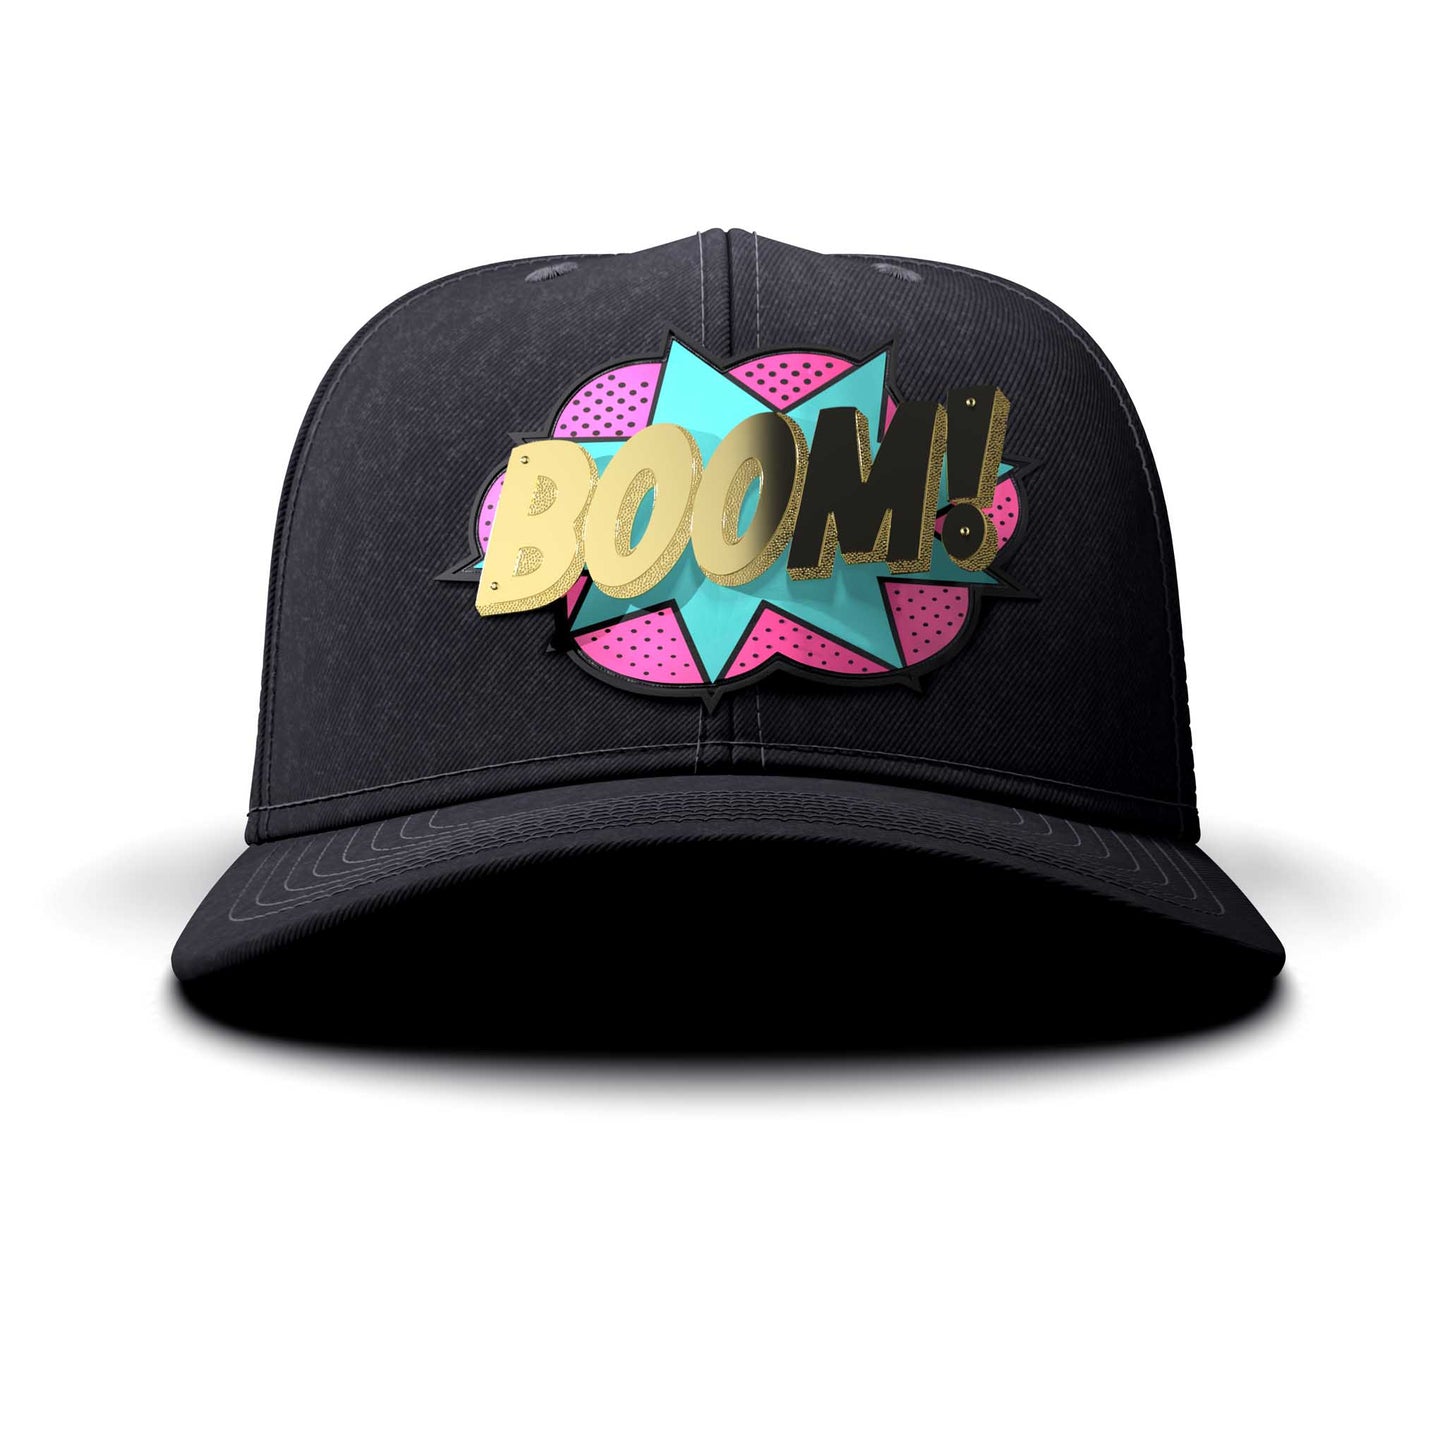 BOOM! - Gold Letters & Patch, curved